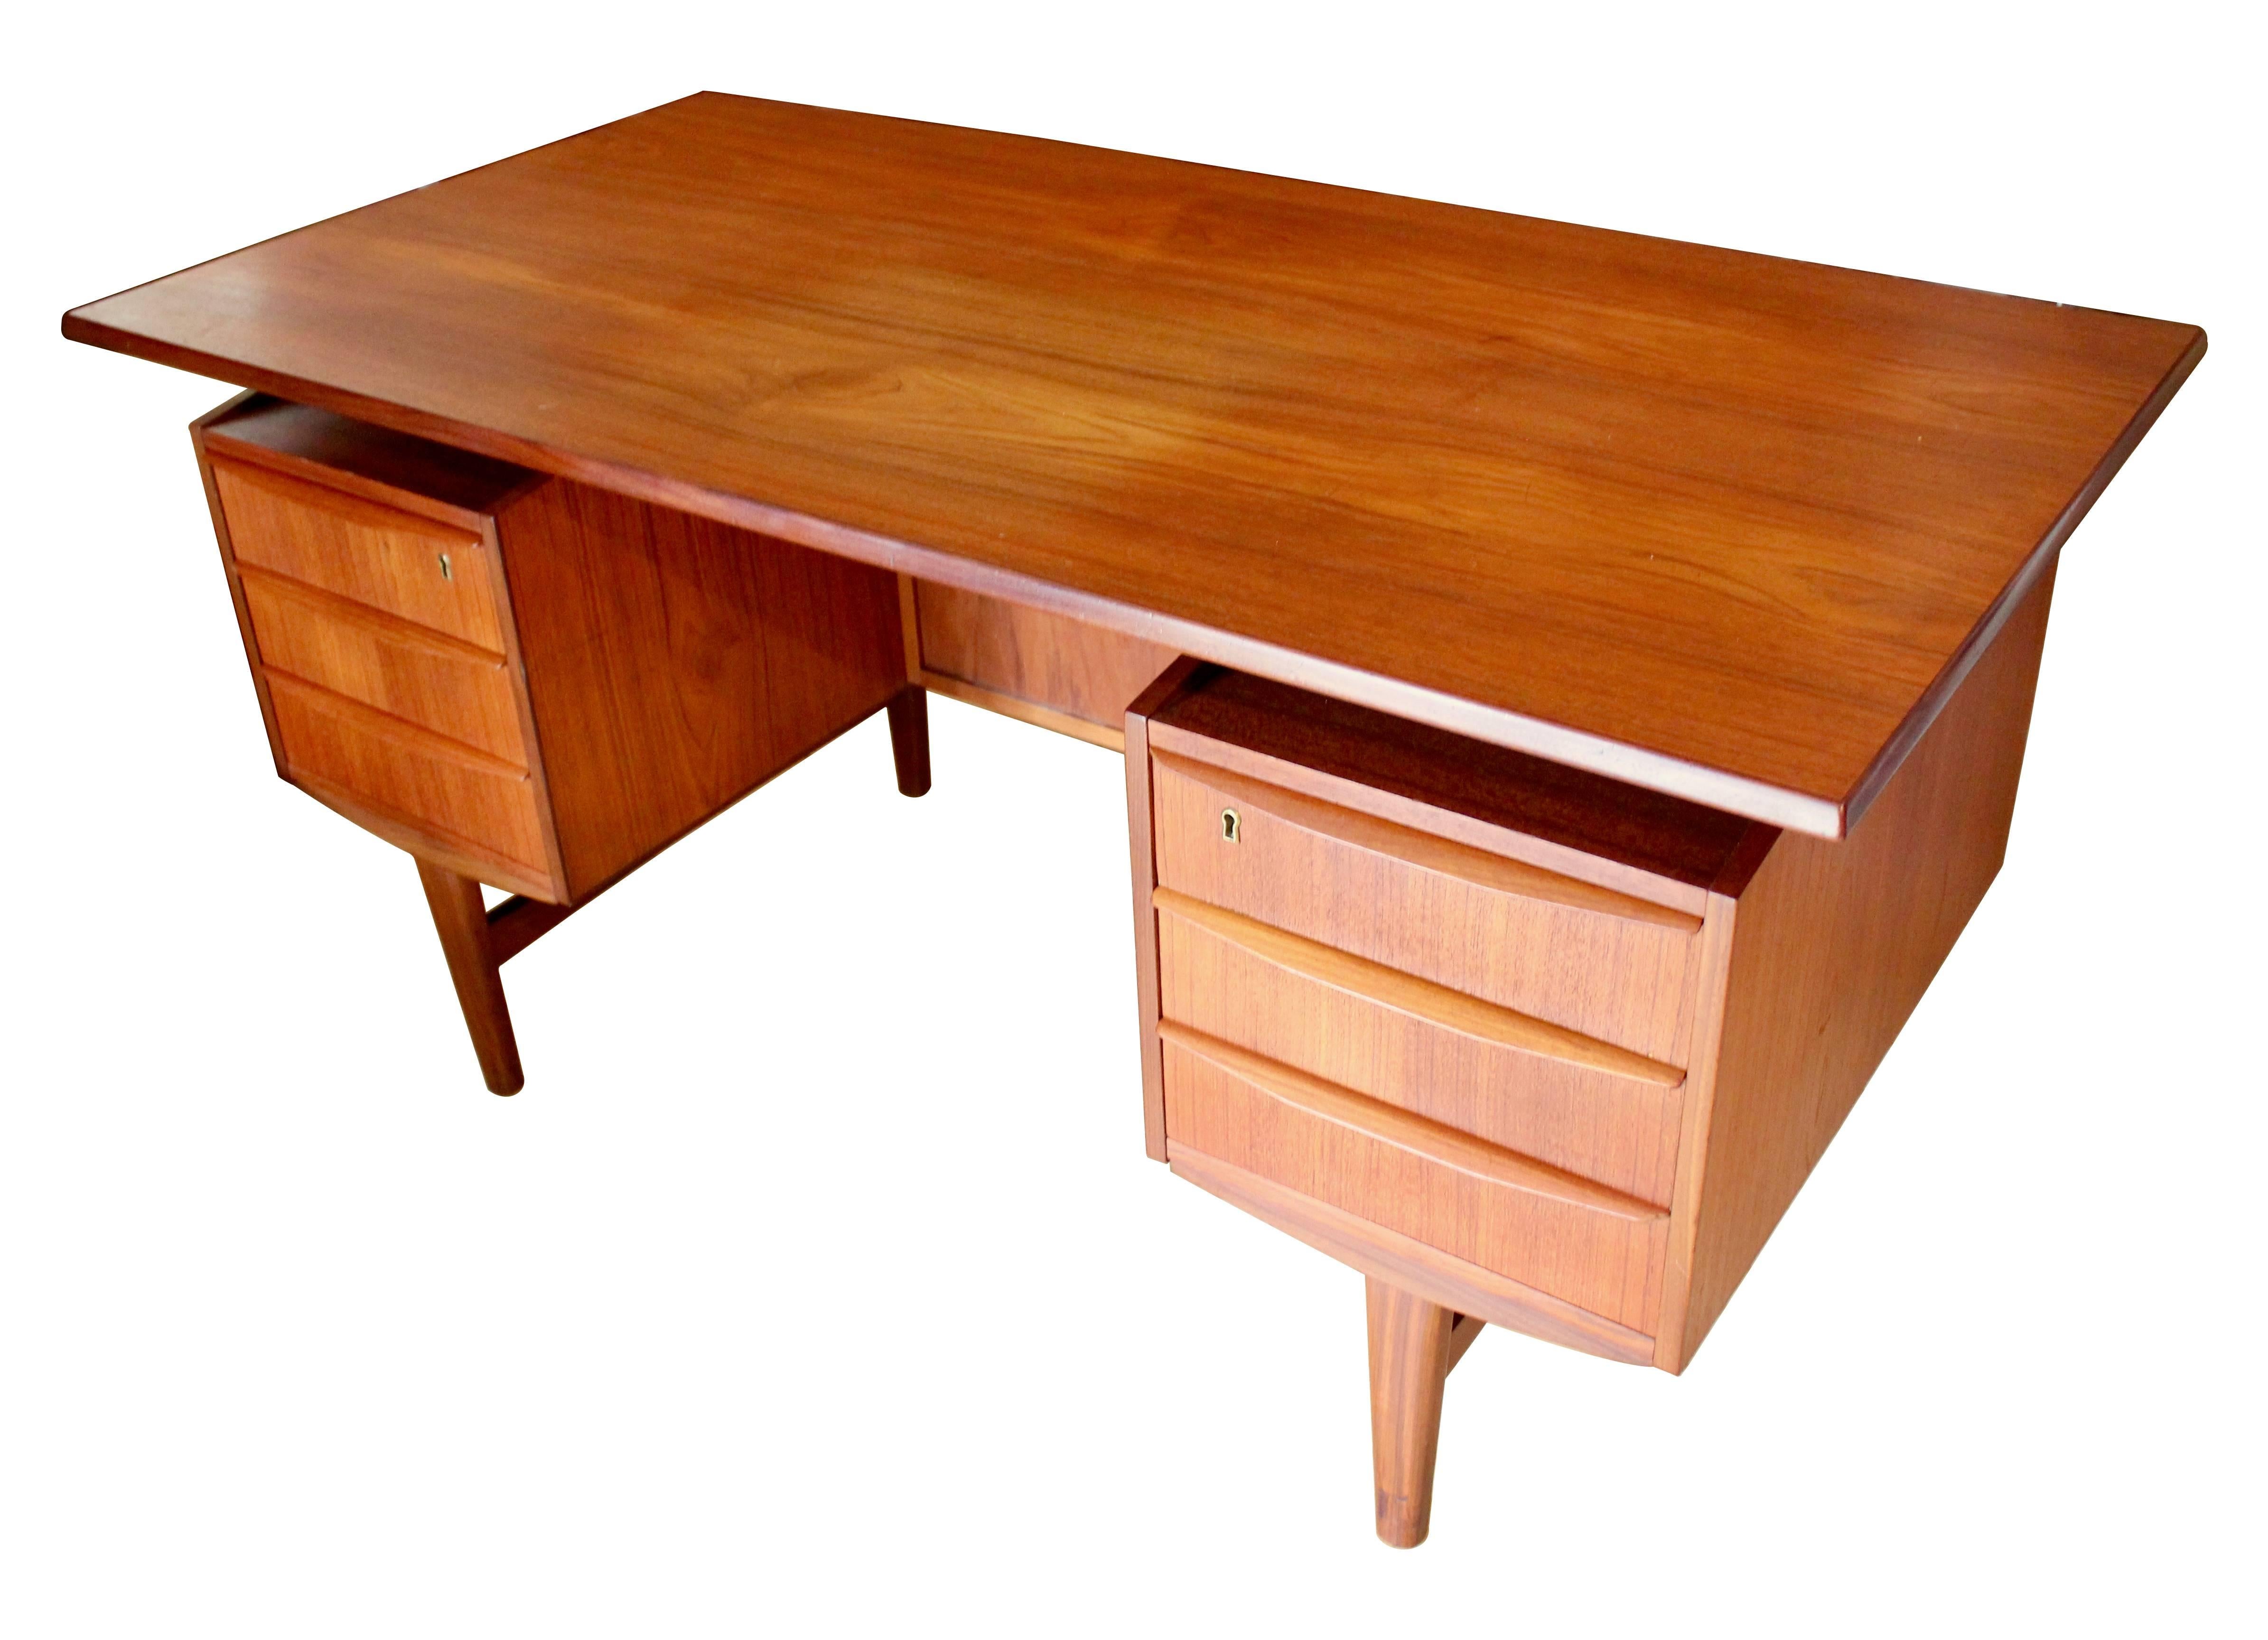 1960s Danish modern teak executive desk with floating top and locking executive bar. The desk features six drawers (two locking), two open shelves, and a drop-down bar with lock.